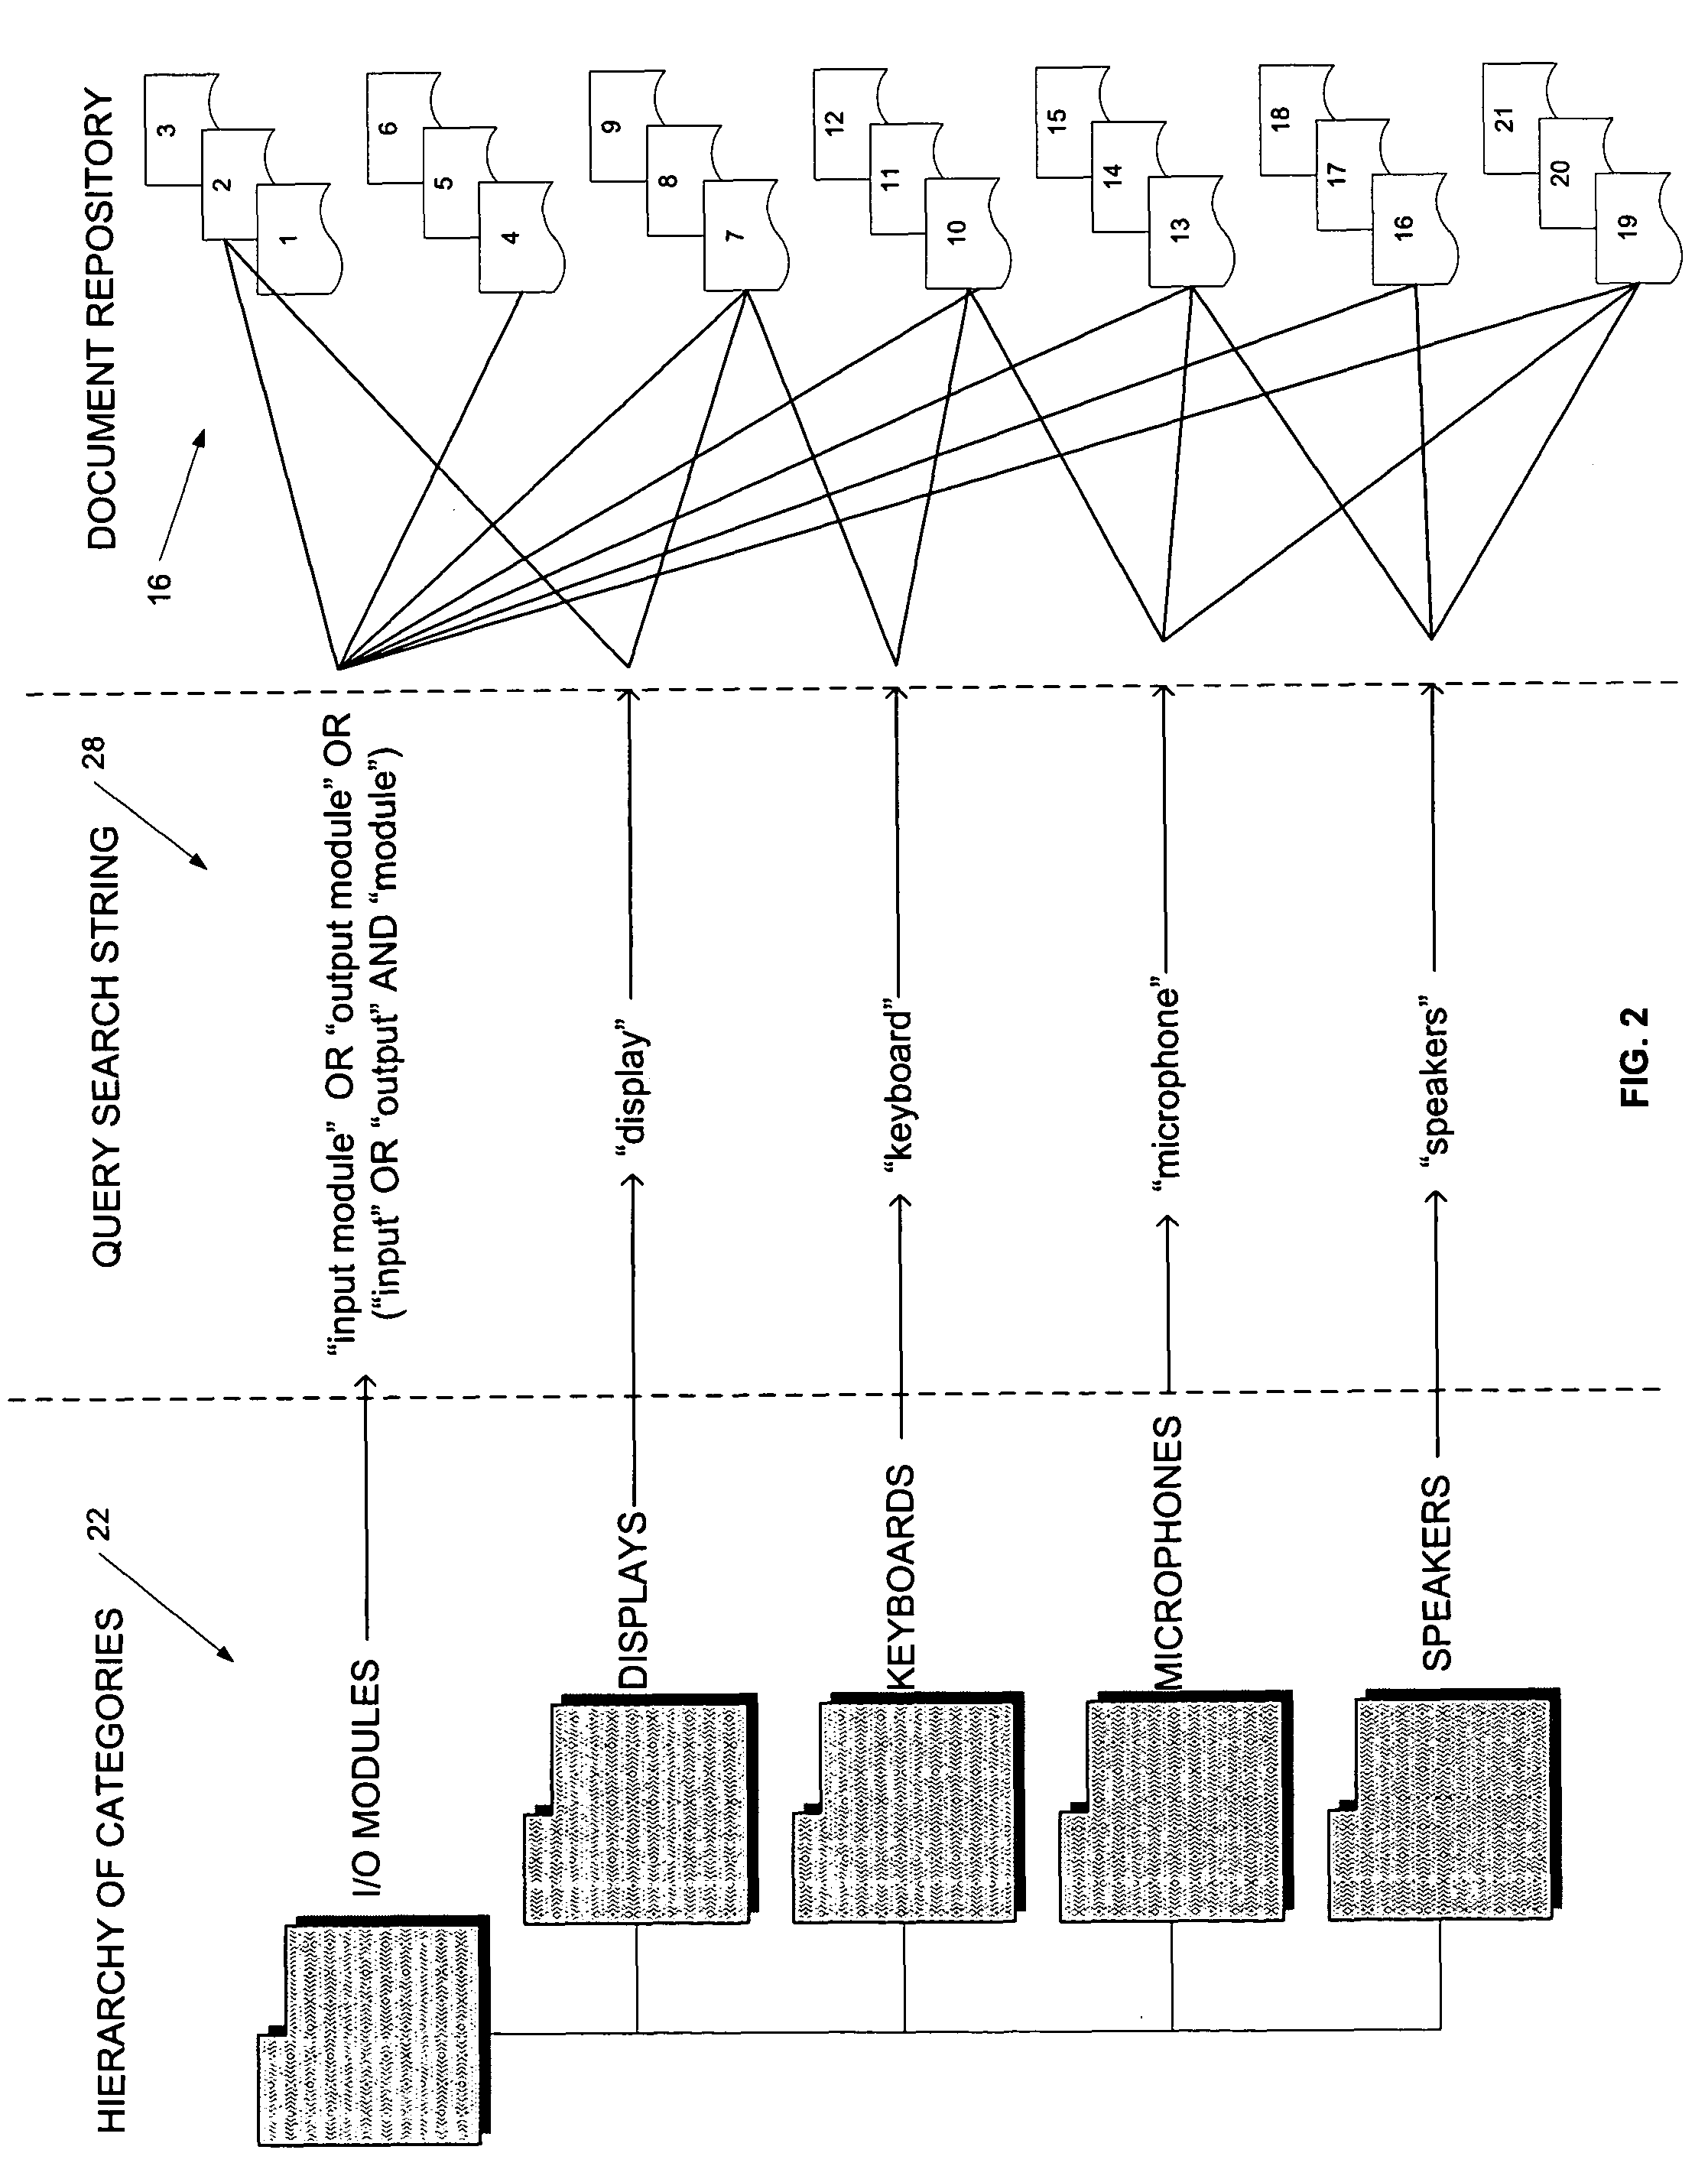 Method and system for updating display of a hierarchy of categories for a document repository